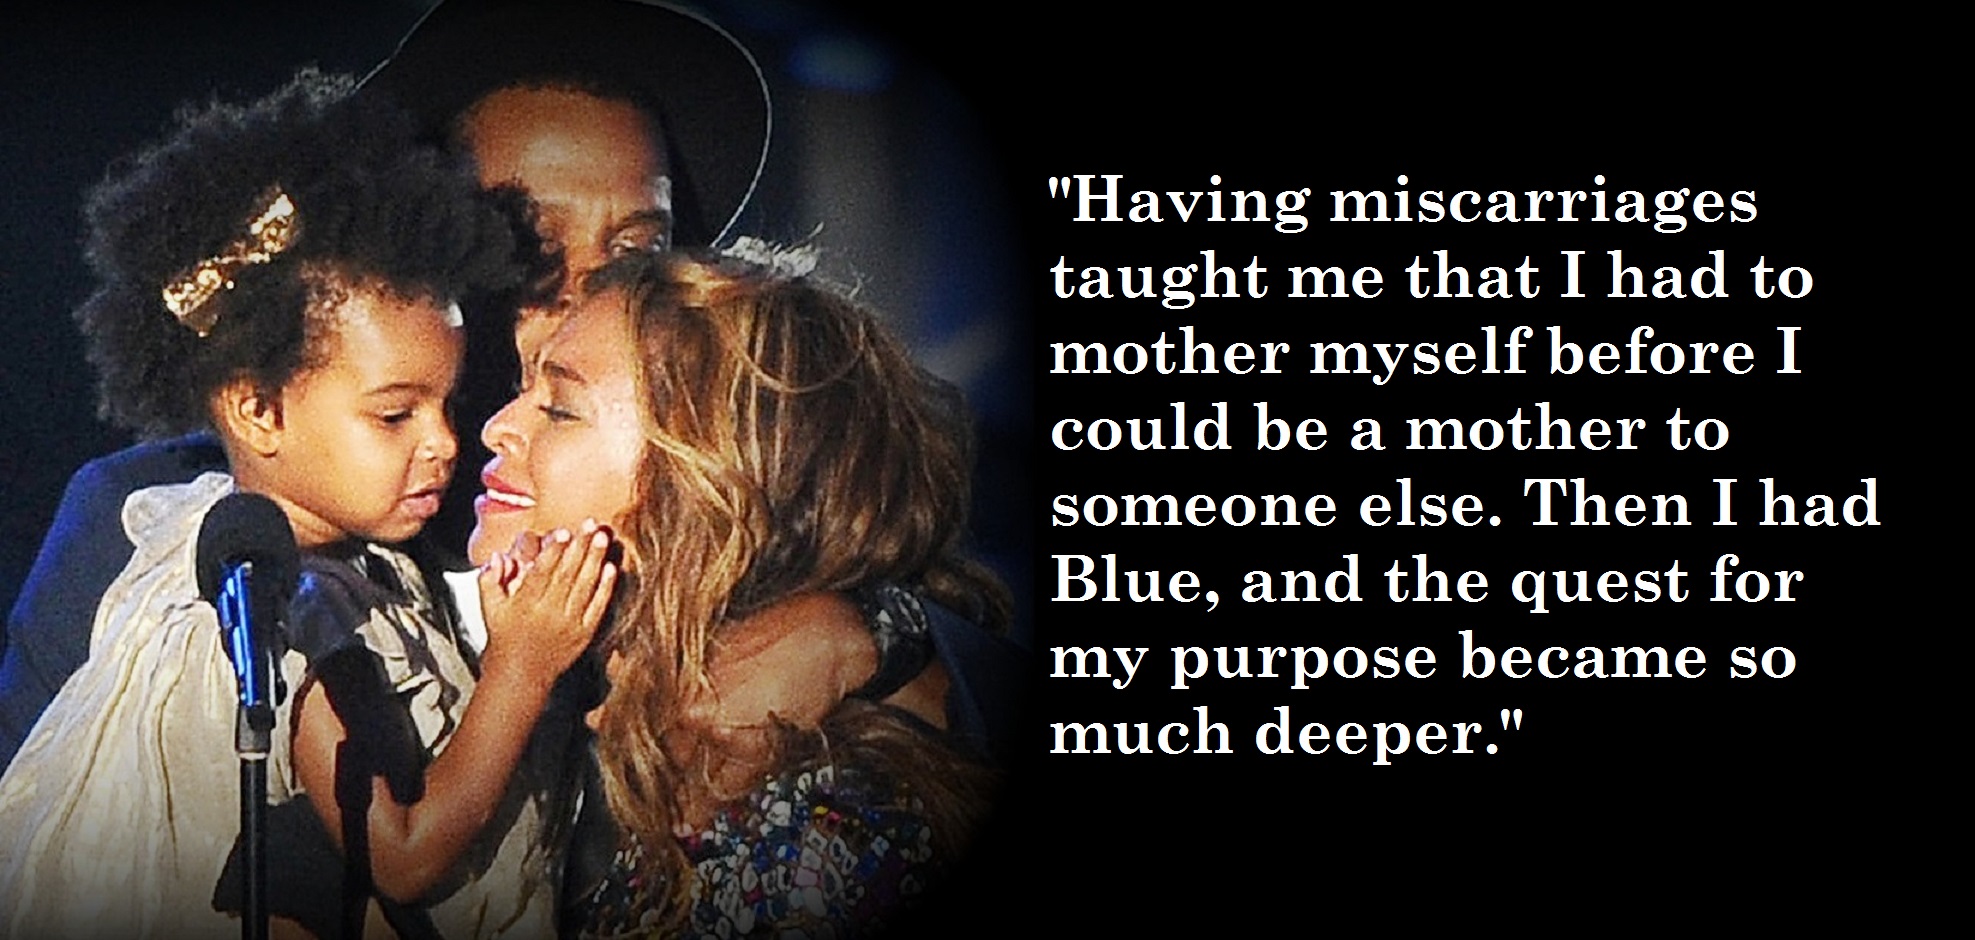 Beyonce Talks About Suffering From Miscarriages & How The Meaning Of ‘Success’ Changed For Her!